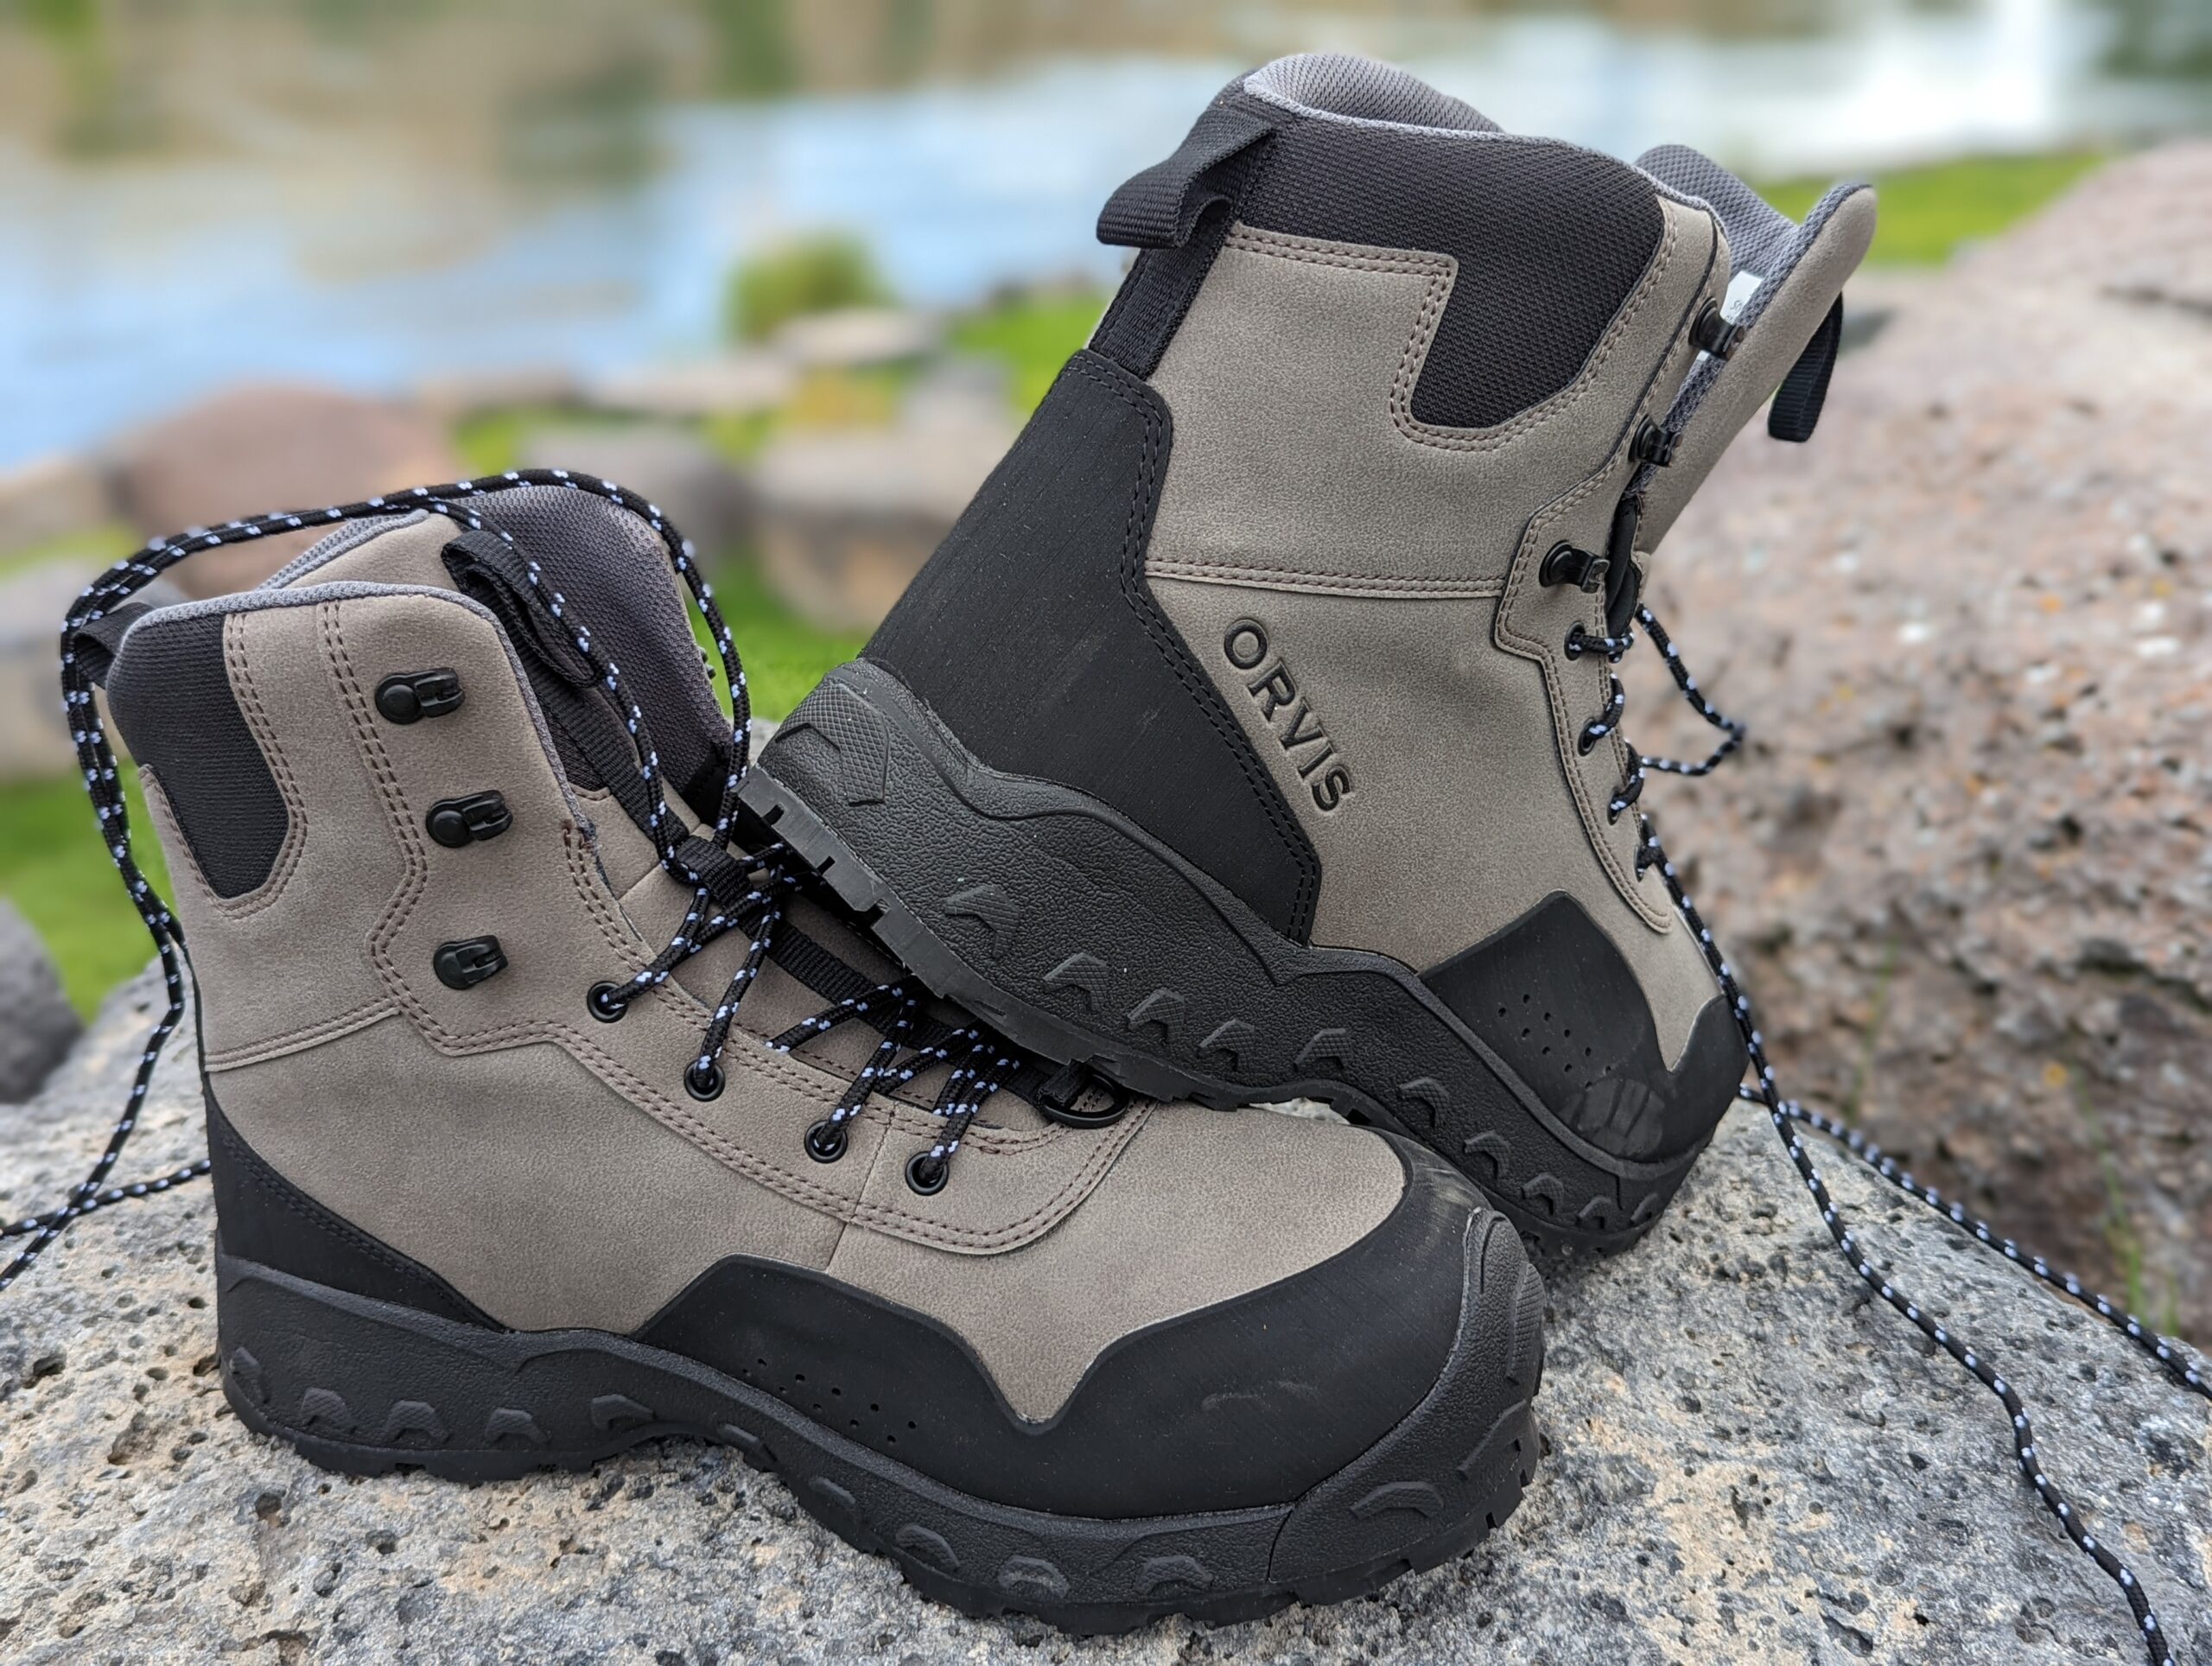 7 Best Wading Boots 2022 - Rubber and Studded Wading Boots for Fishing